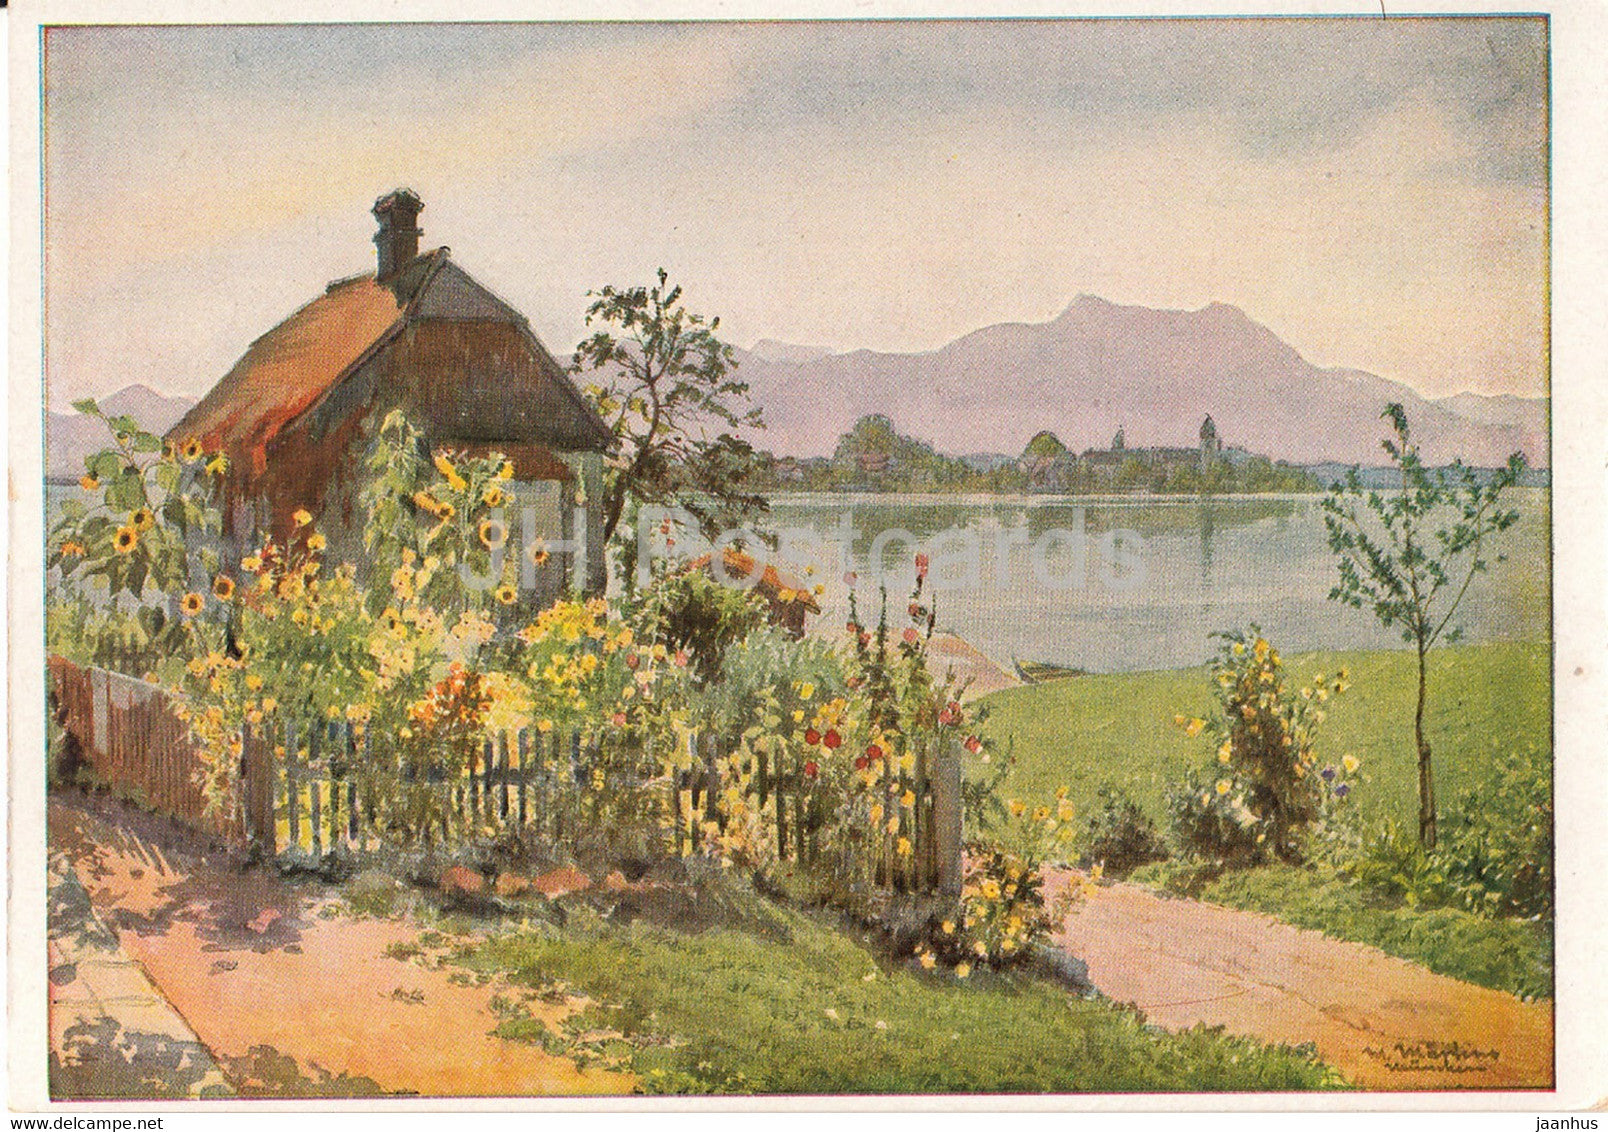 painting by Max Martens - Am Chiemsee - 1637 - German art - Germany - unused - JH Postcards